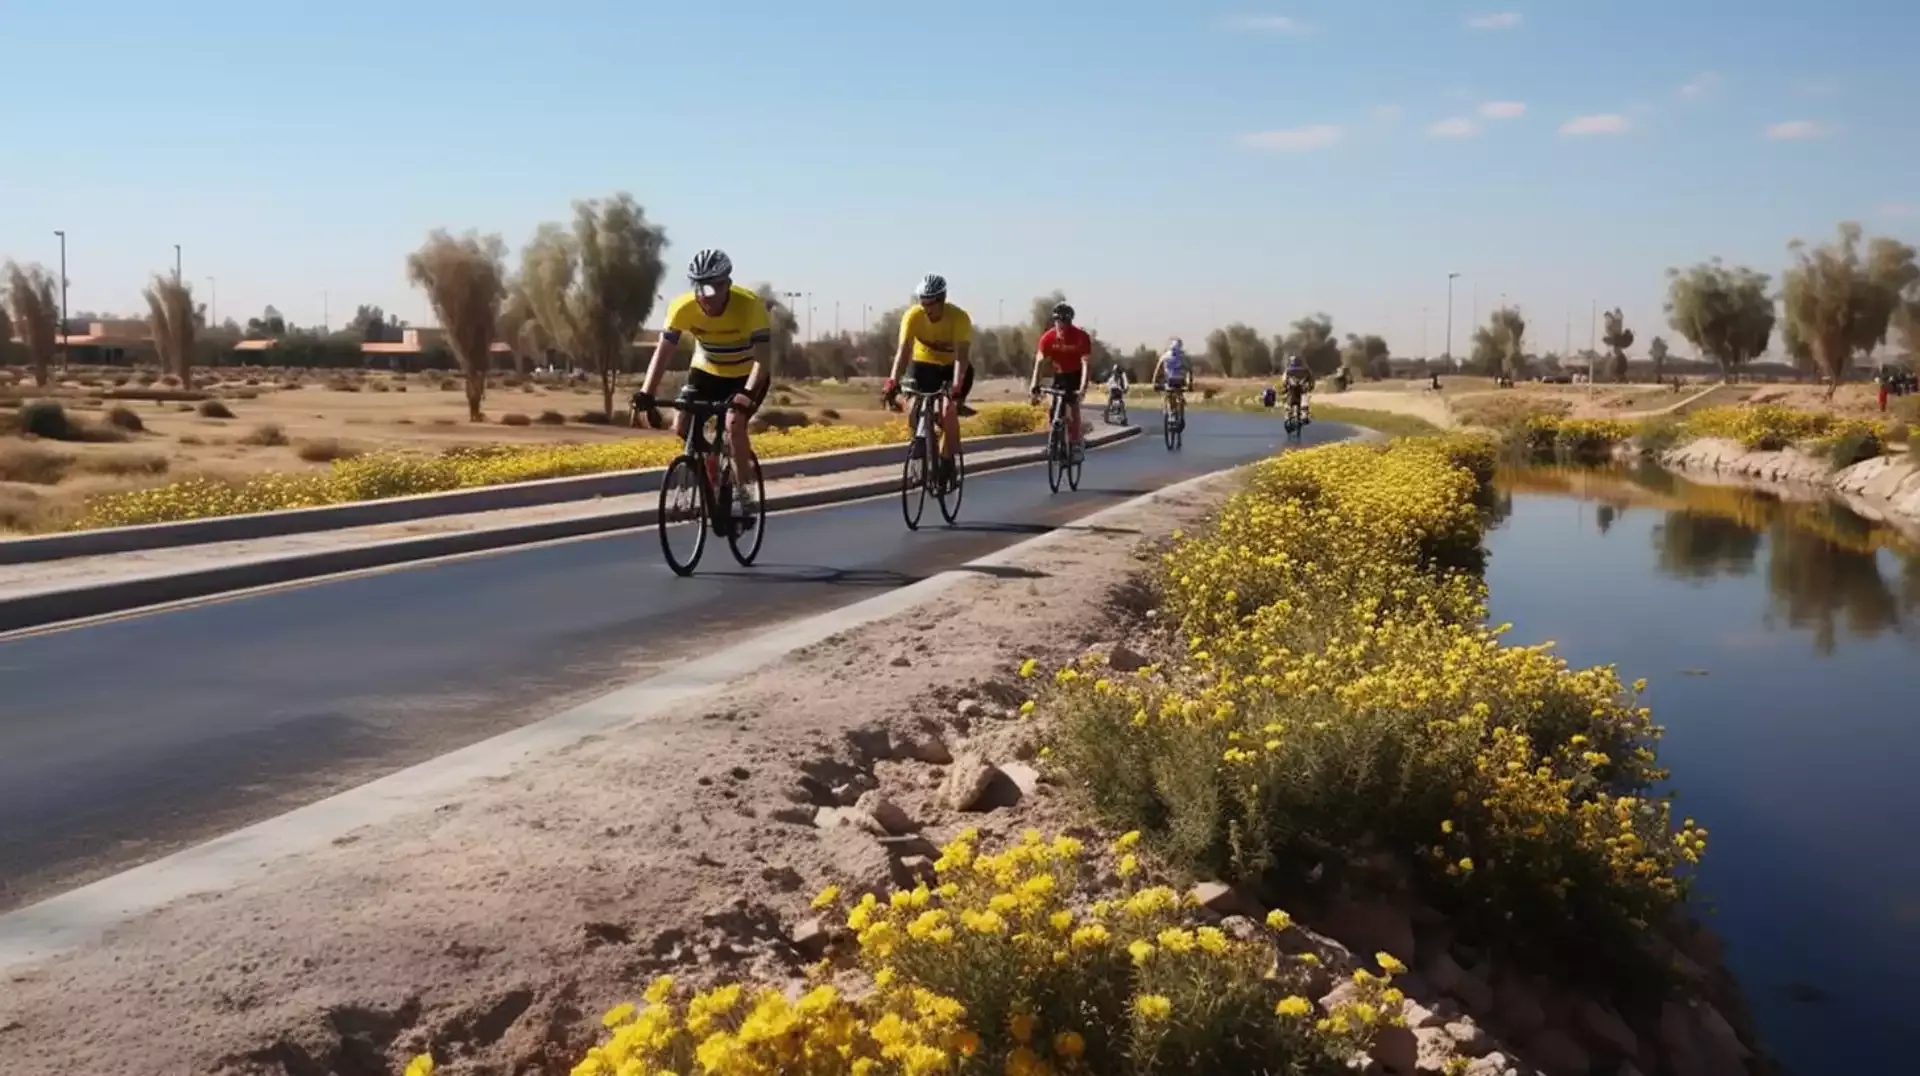 Cycling Tracks in Arabian Ranches - Cyclists on the Track